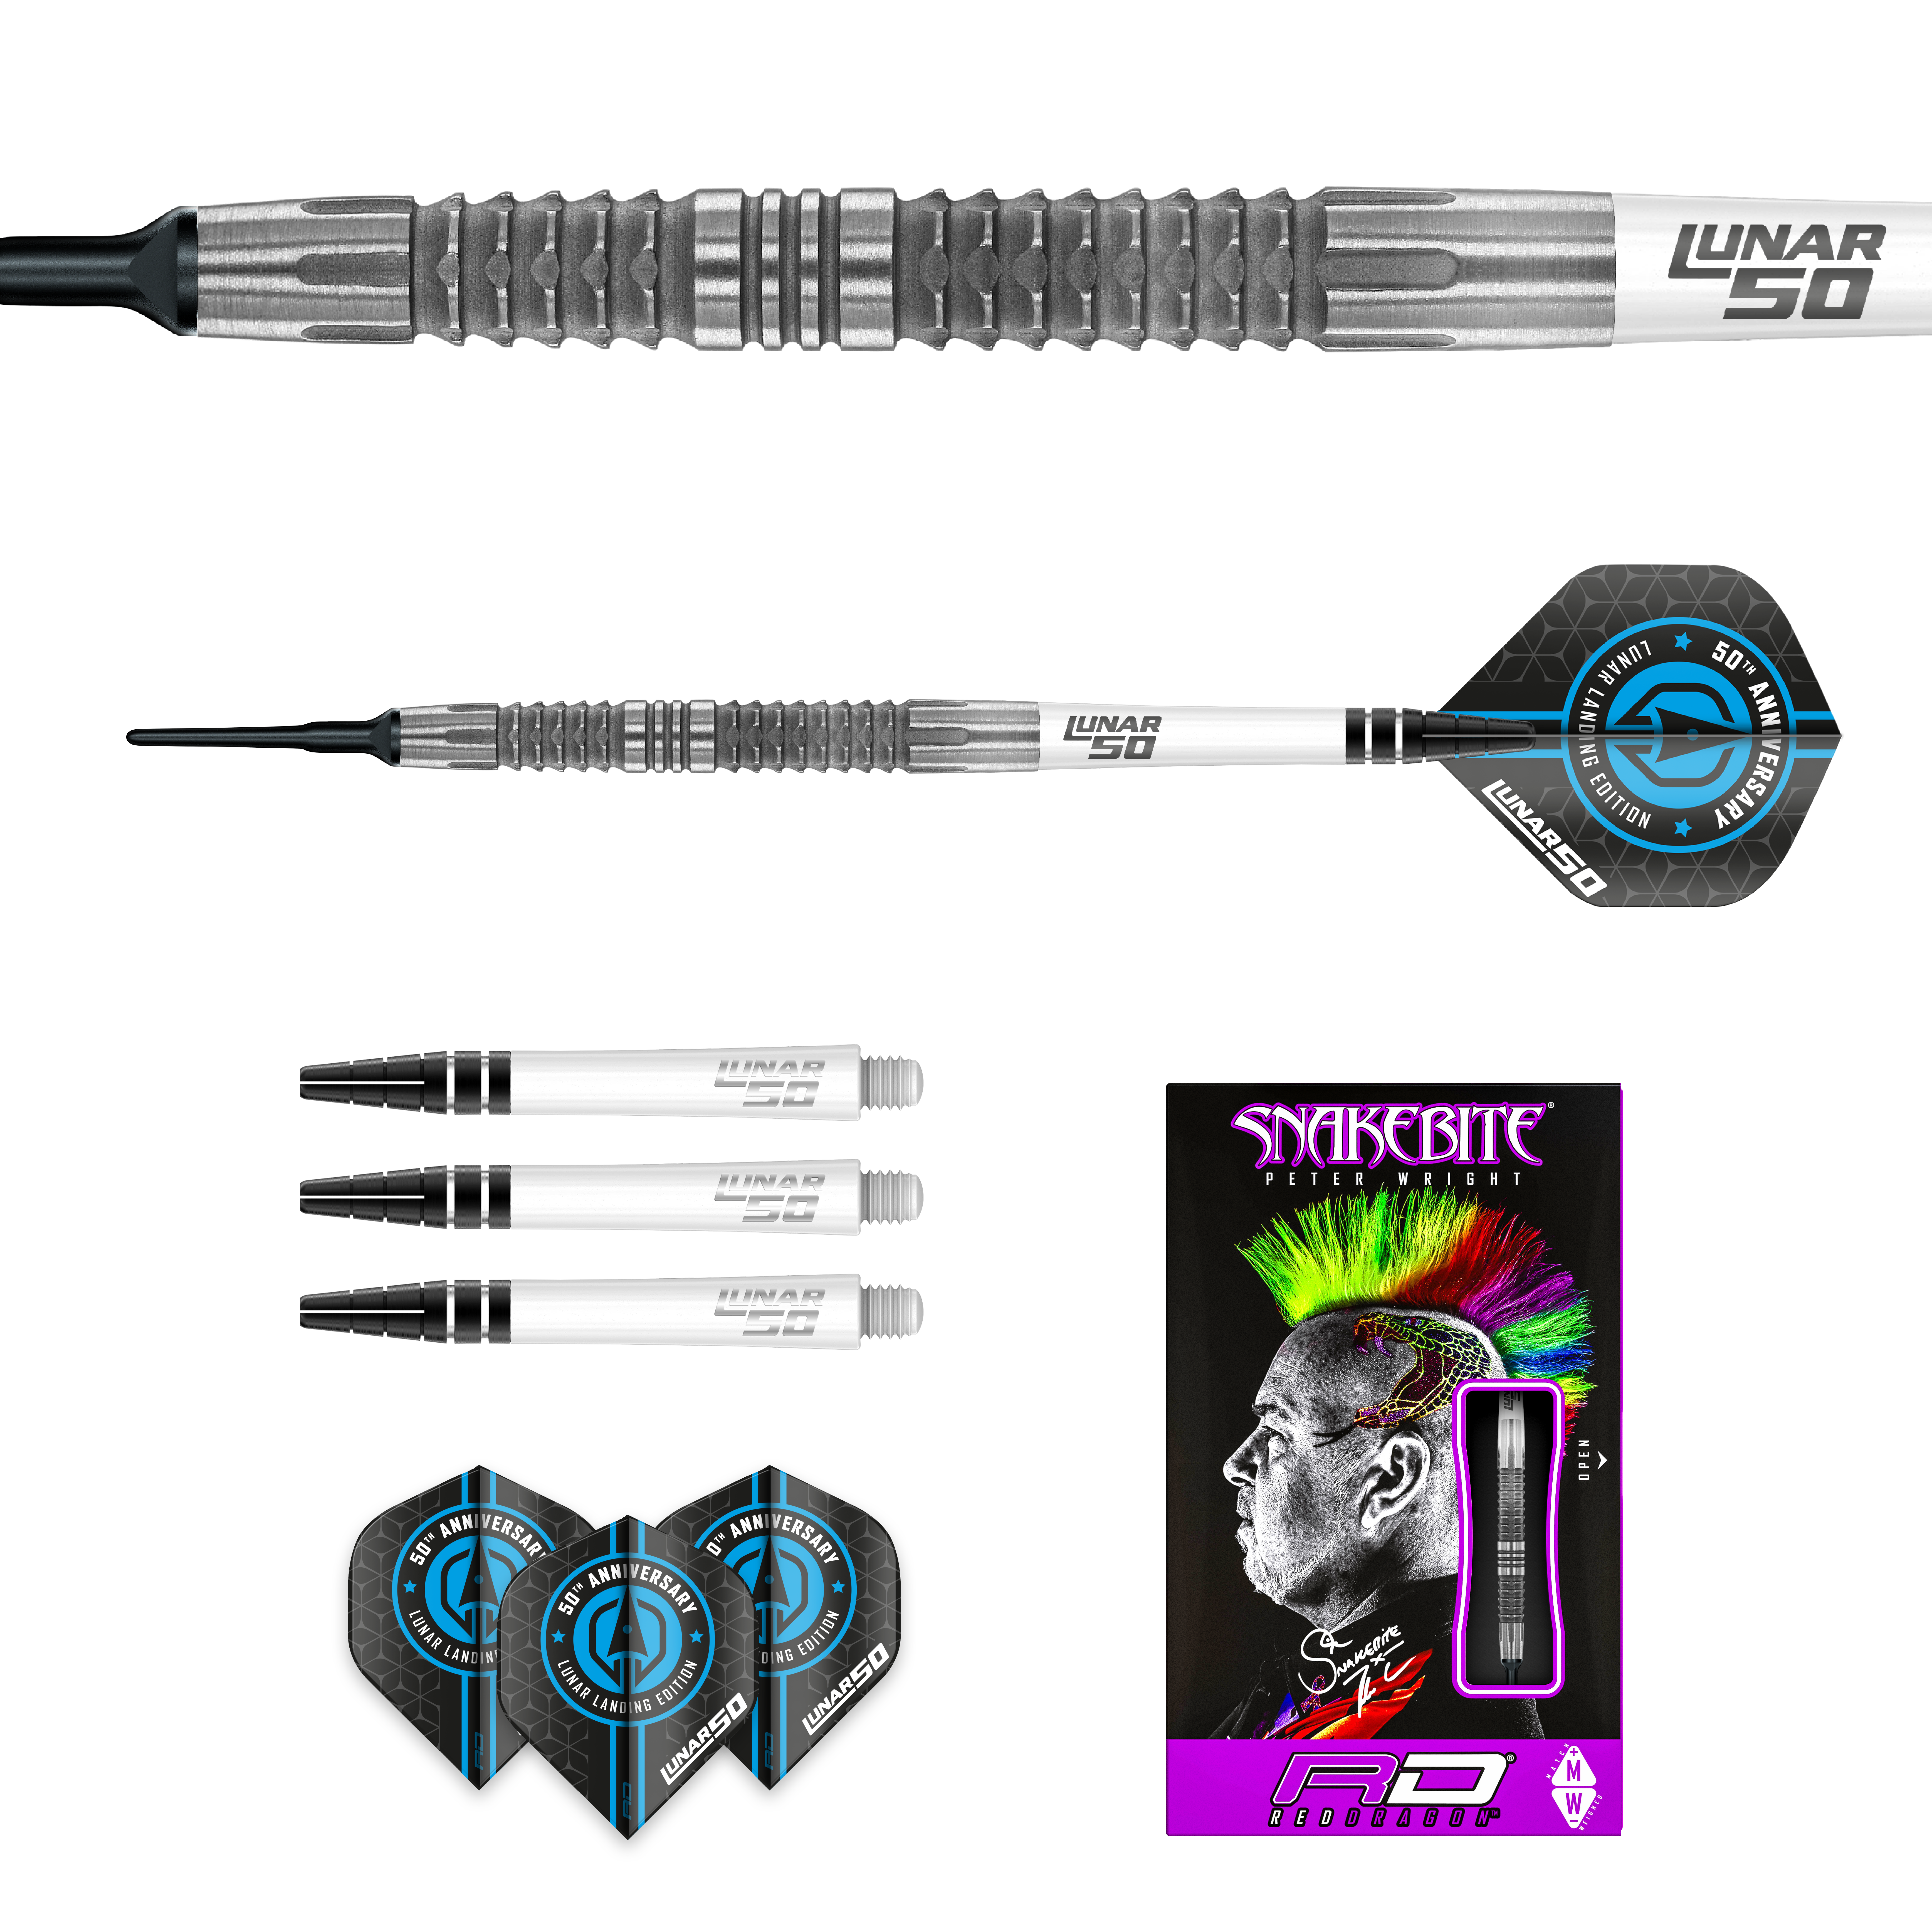 Red Dragon Peter Wright Lunar 50th 22g Steel Tip Darts 